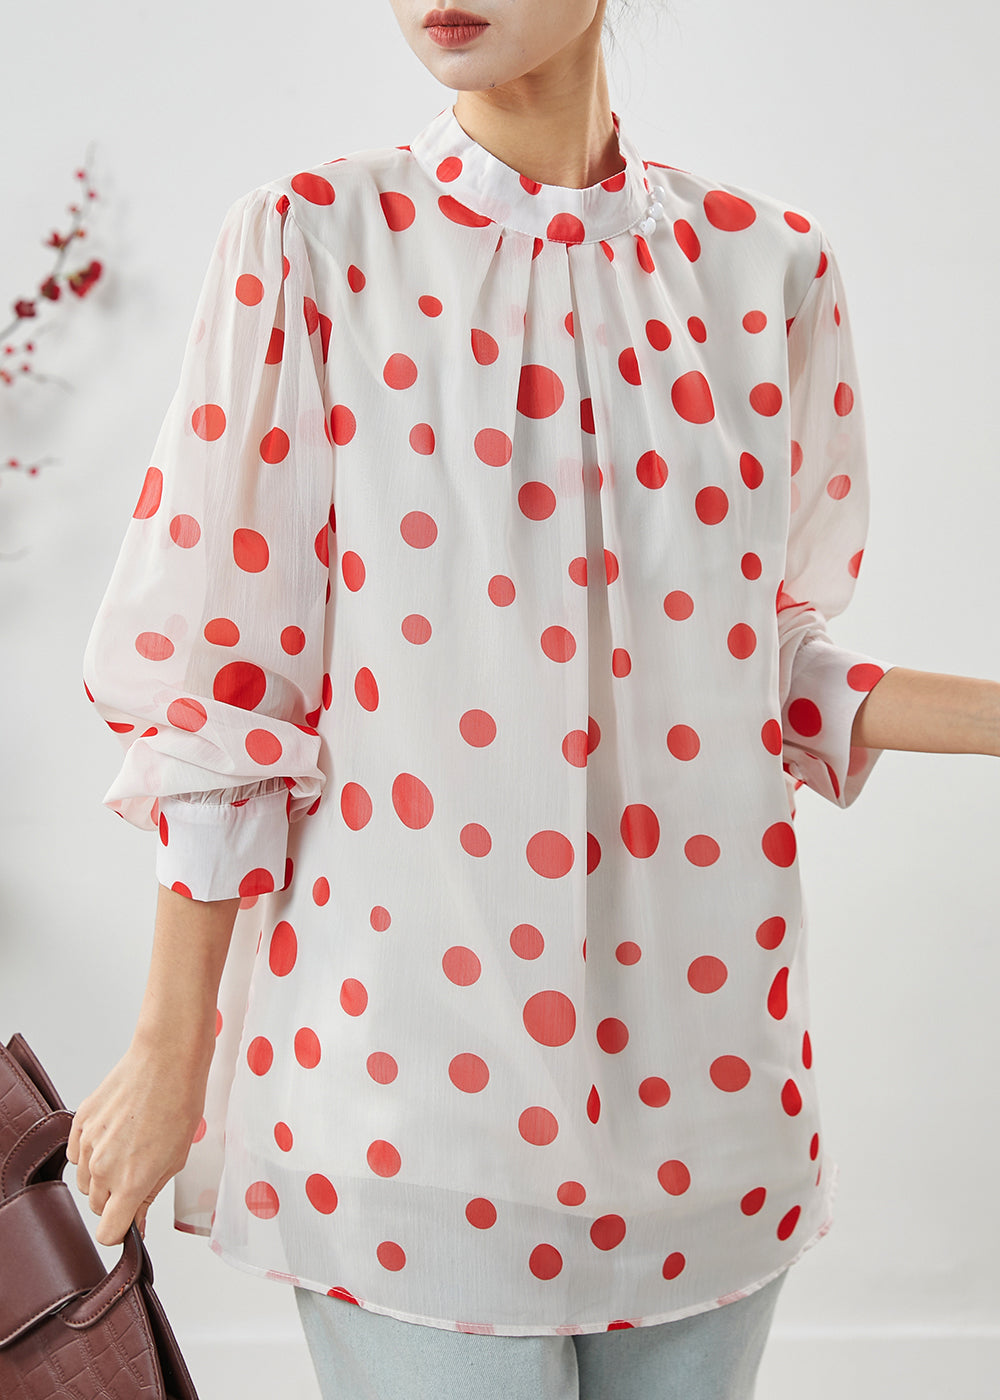 French White Stand Collar Dot Print Chiffon Blouses Spring